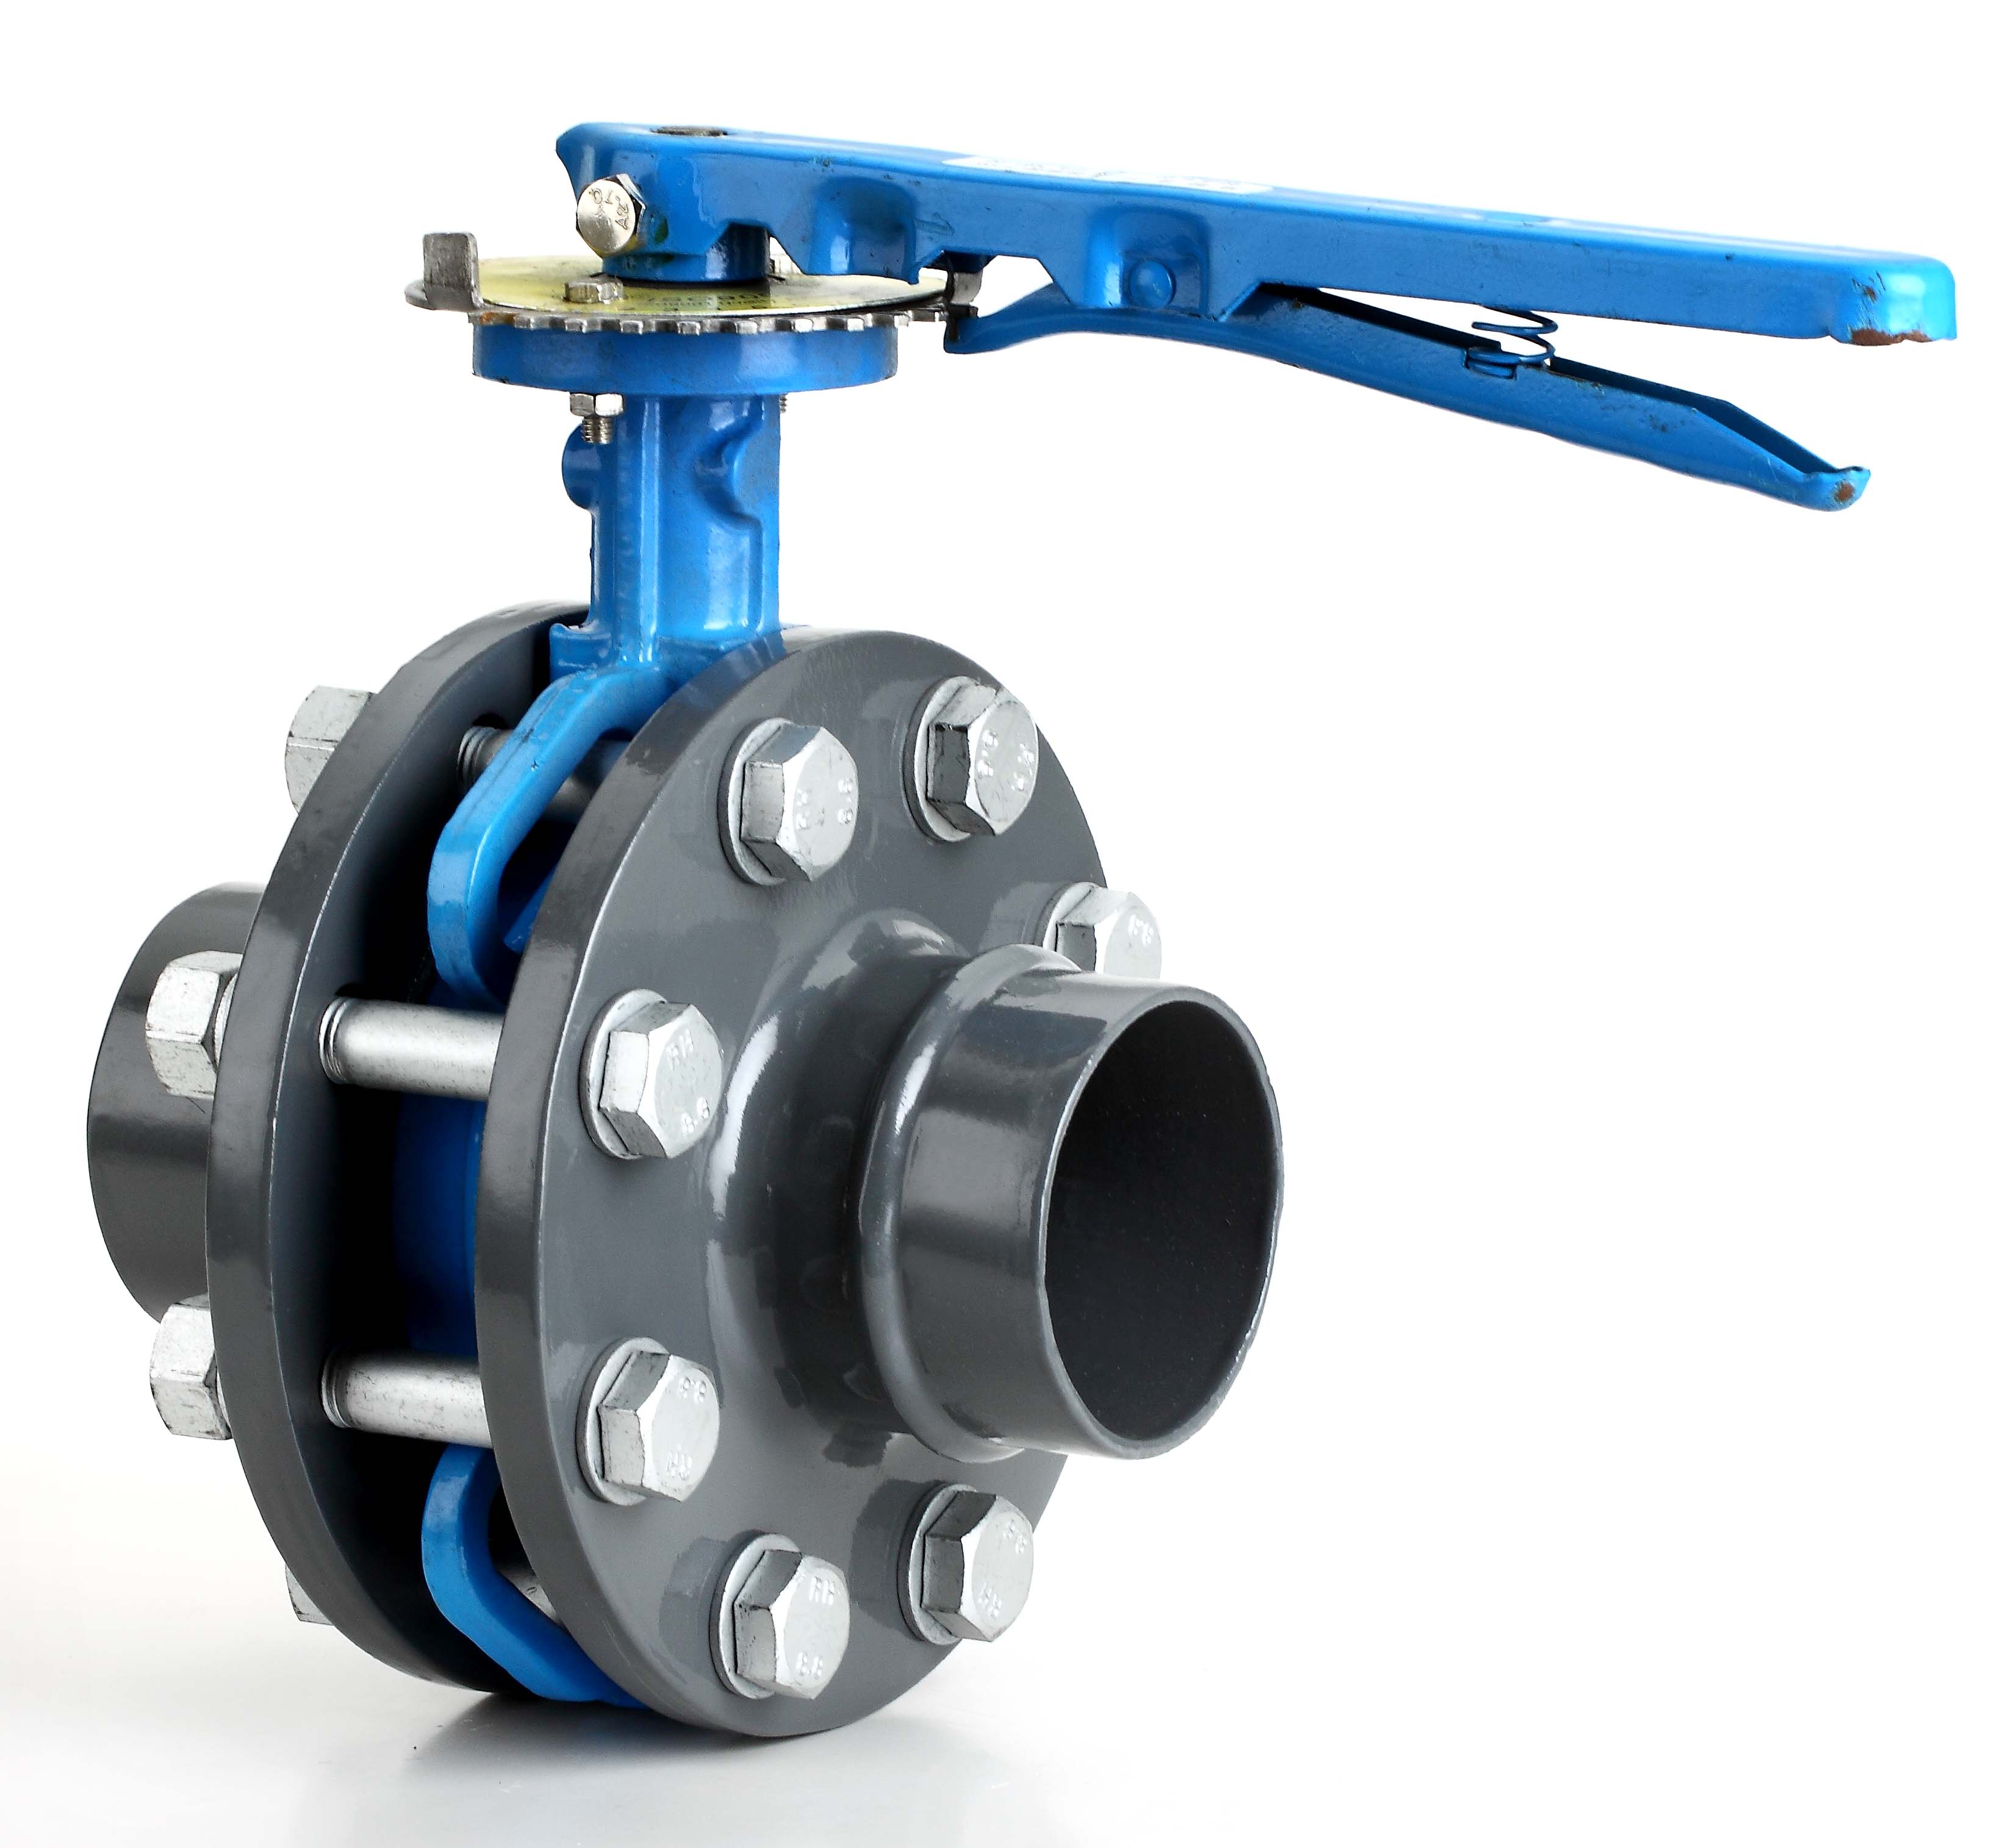 150 mm (6") Butterfly Valve (Pre-assembled) | Air & Hydraulic Equipment